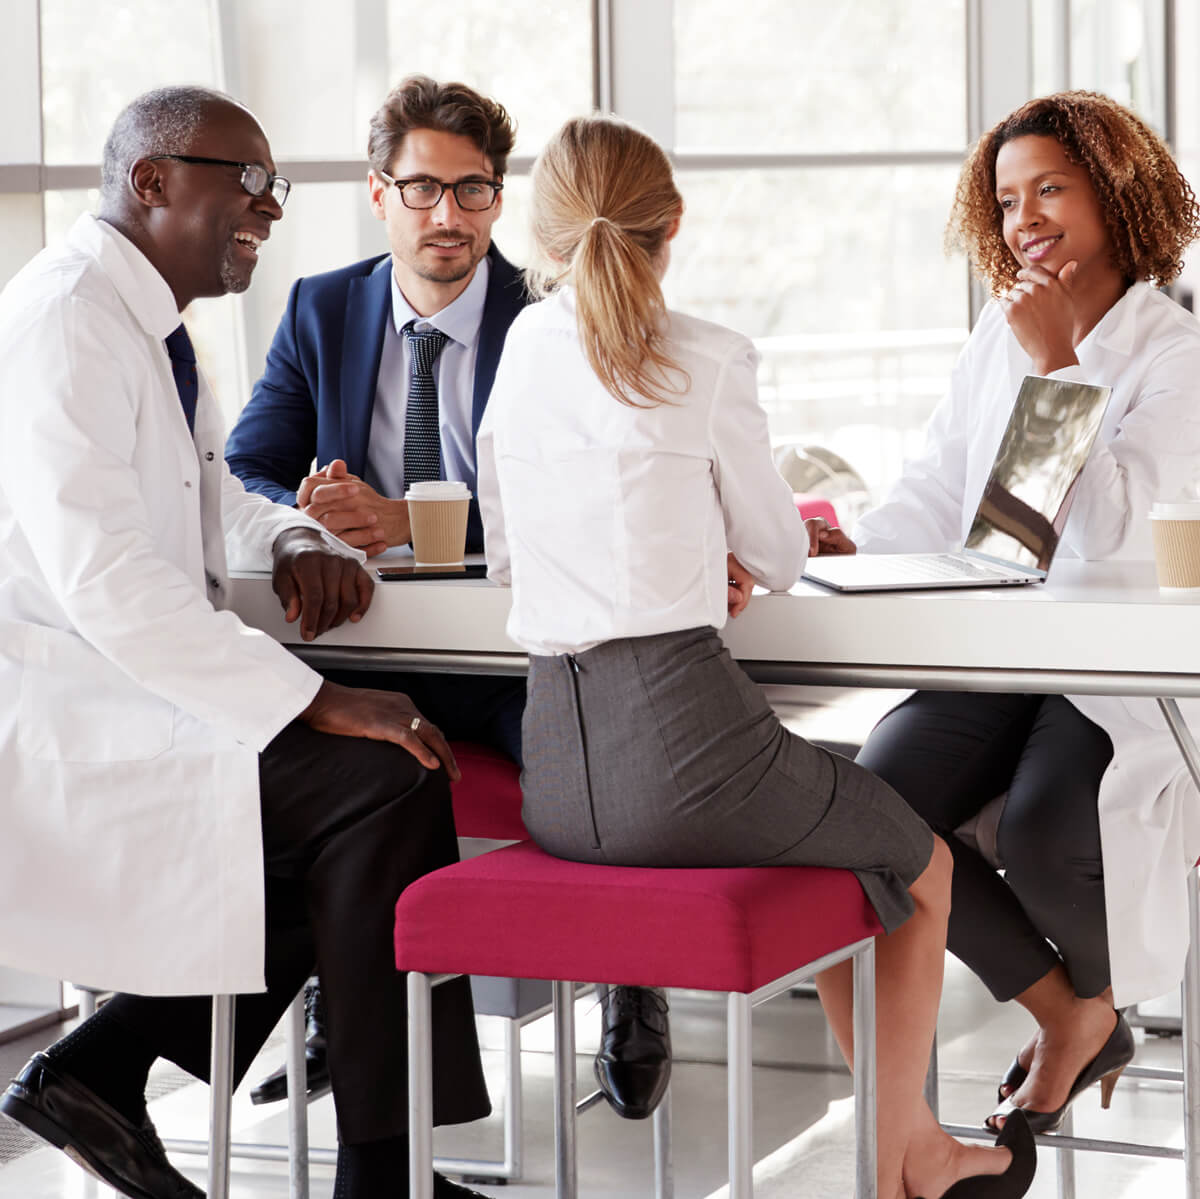 Physicians gather around a table discussing clinical and behavioral health practices